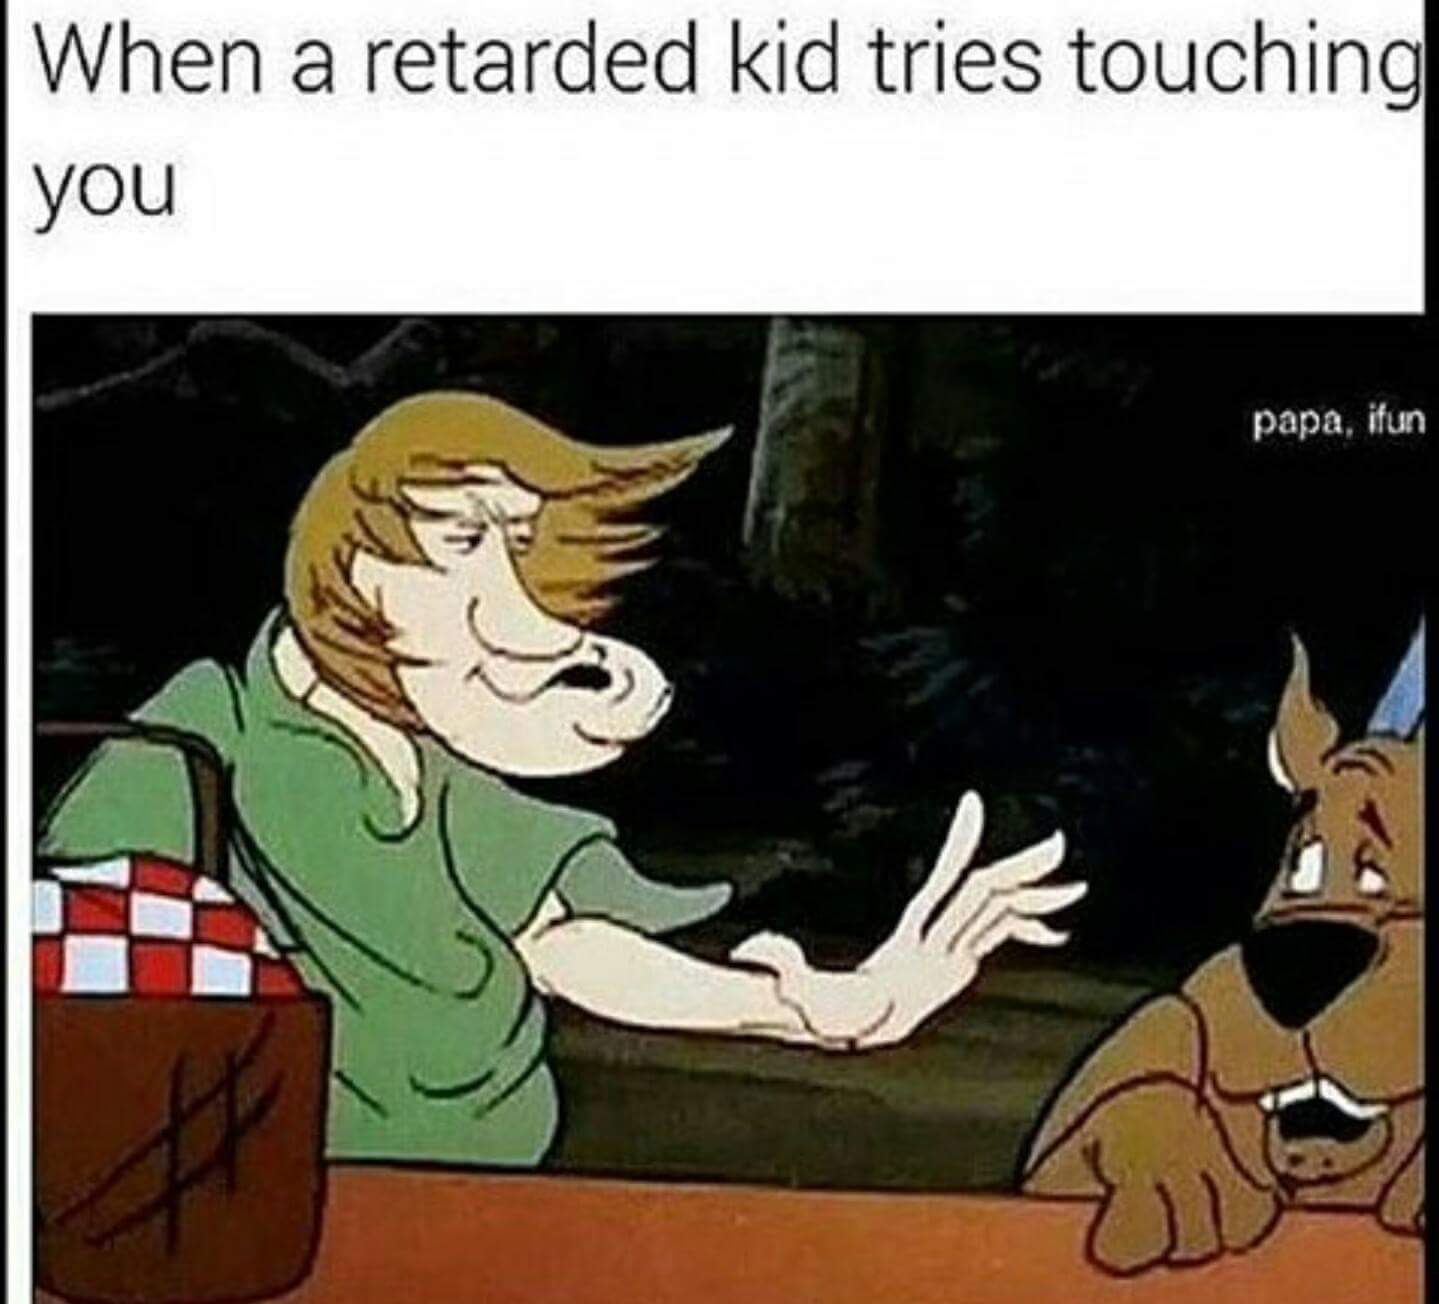 Scooby Doo meme about retarded kid trying to touch you.